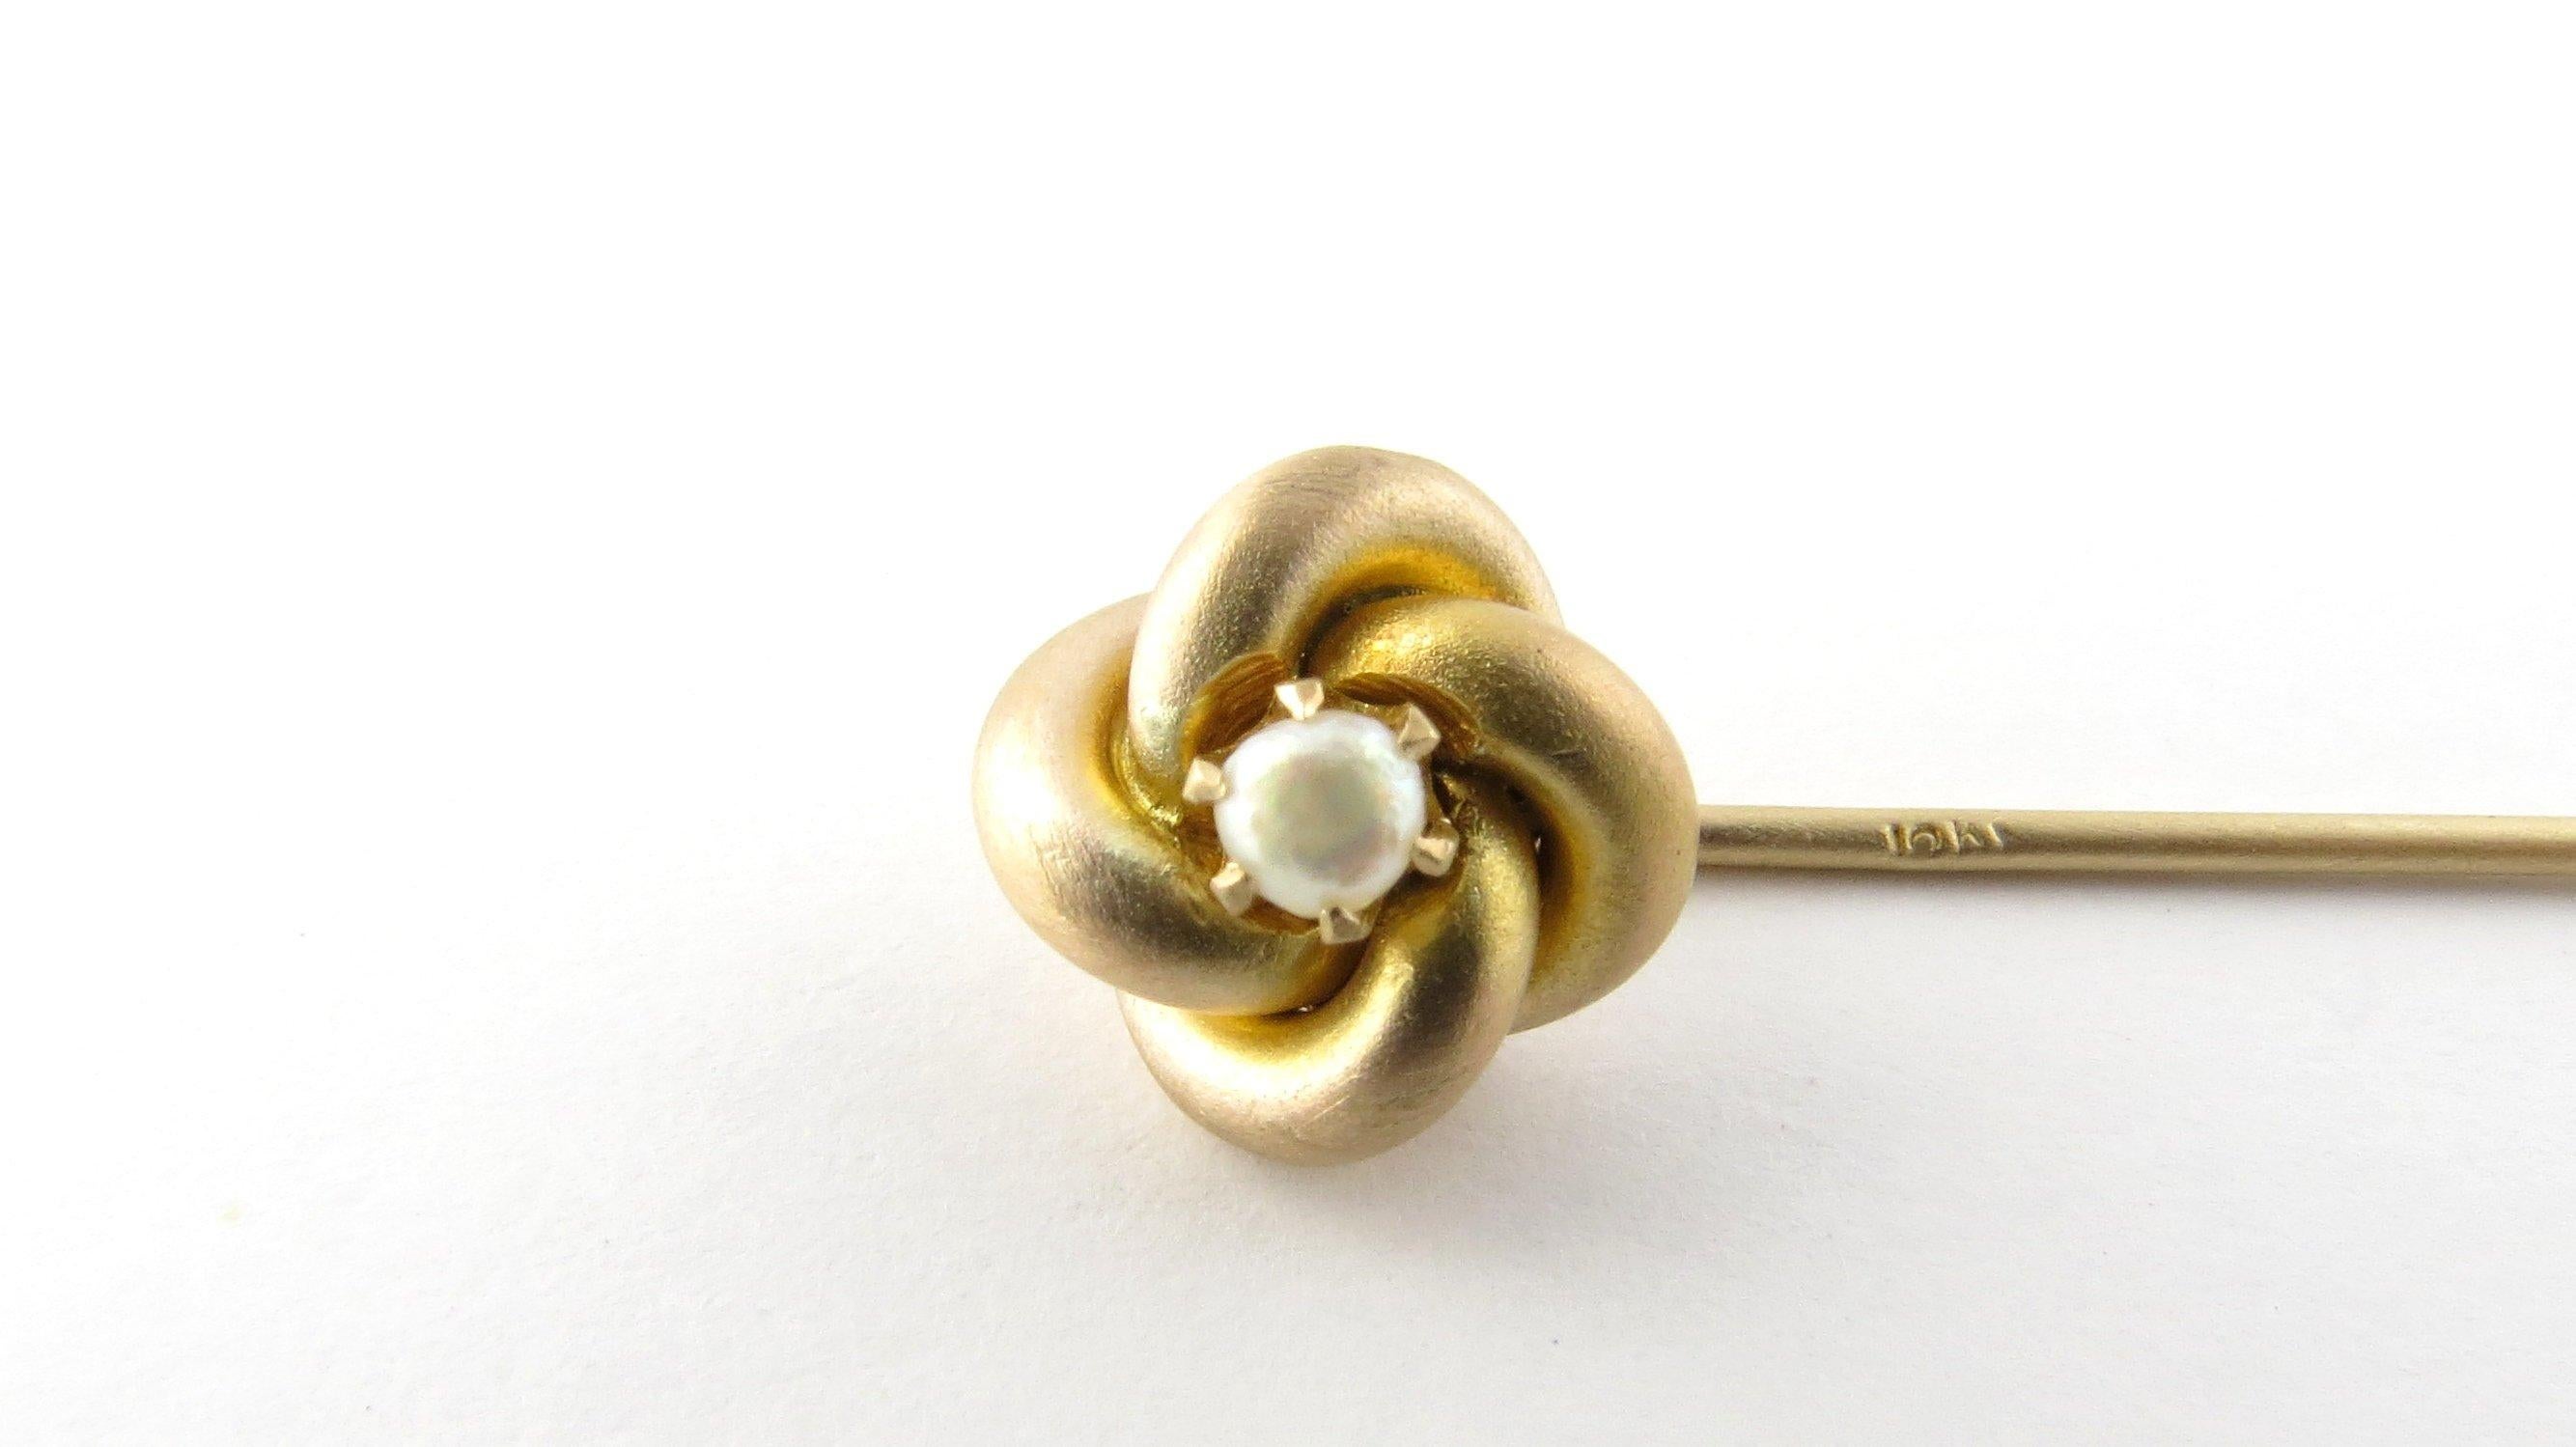 Vintage 10 Karat Yellow Gold and Seed Pearl Stick Pin- 
This elegant stick pin features a lovely 